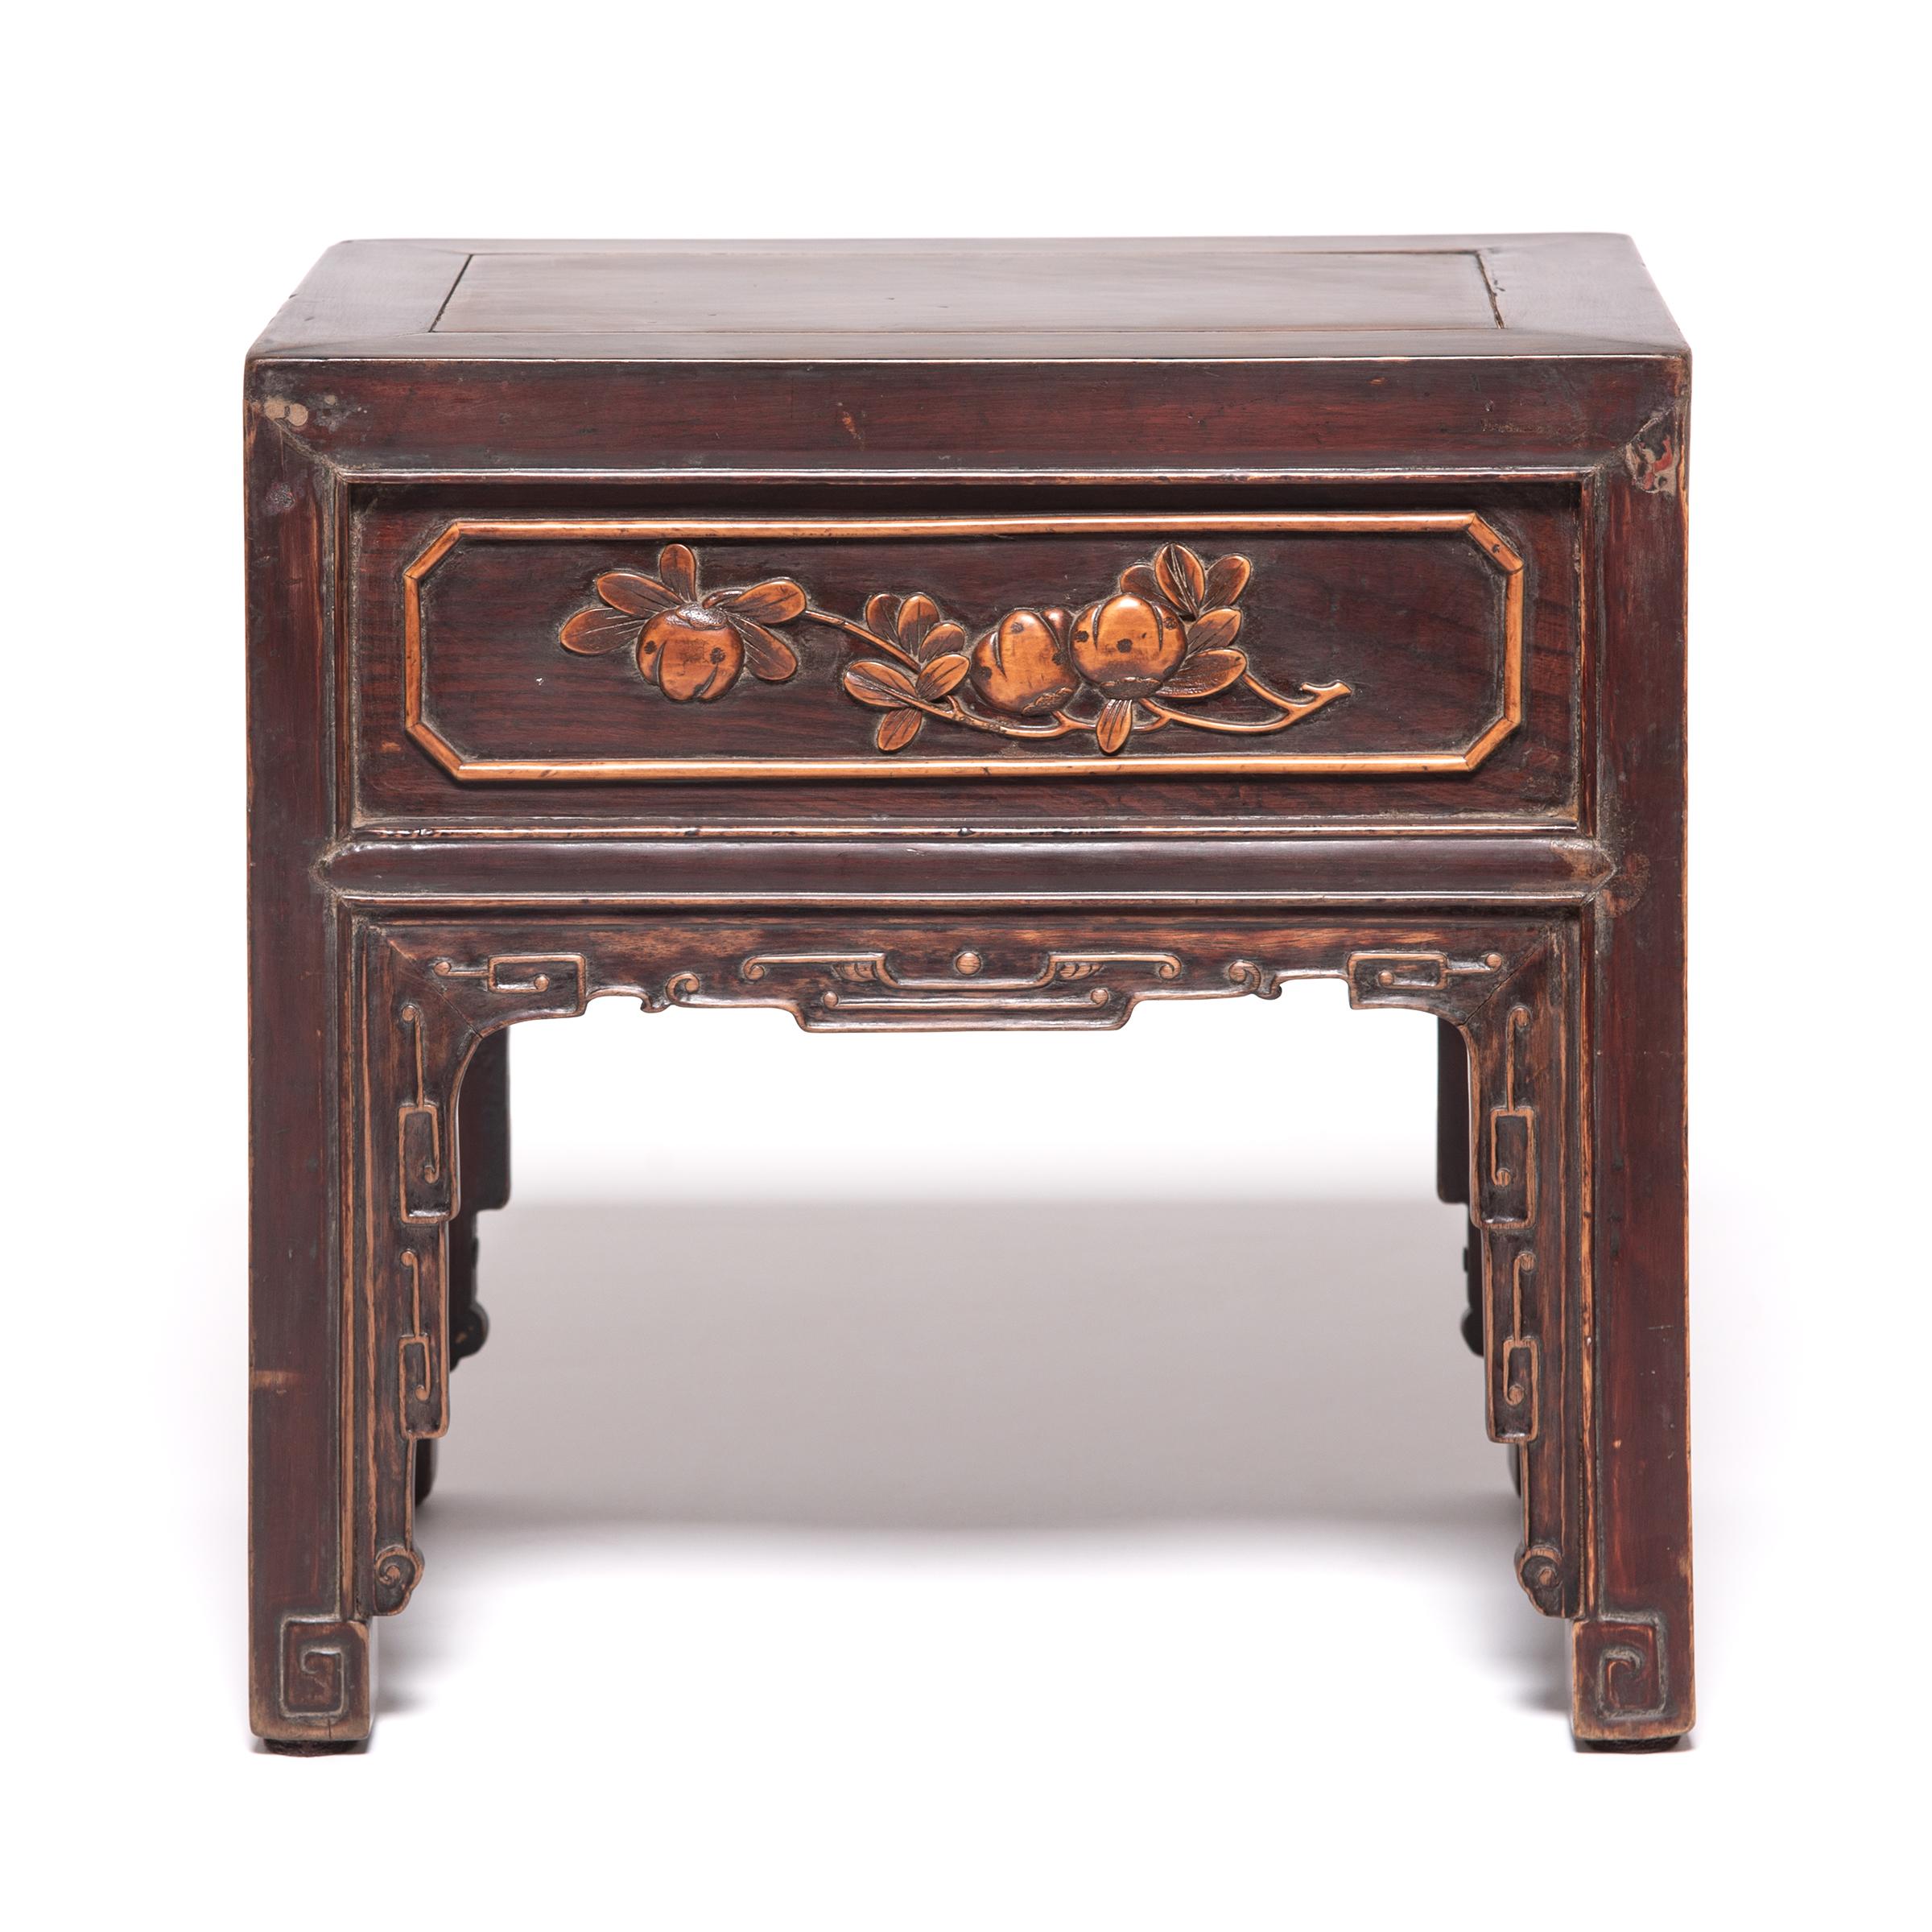 Carved Pair of Petite Chinese Display Tables with Boxwood Inlay, c. 1850